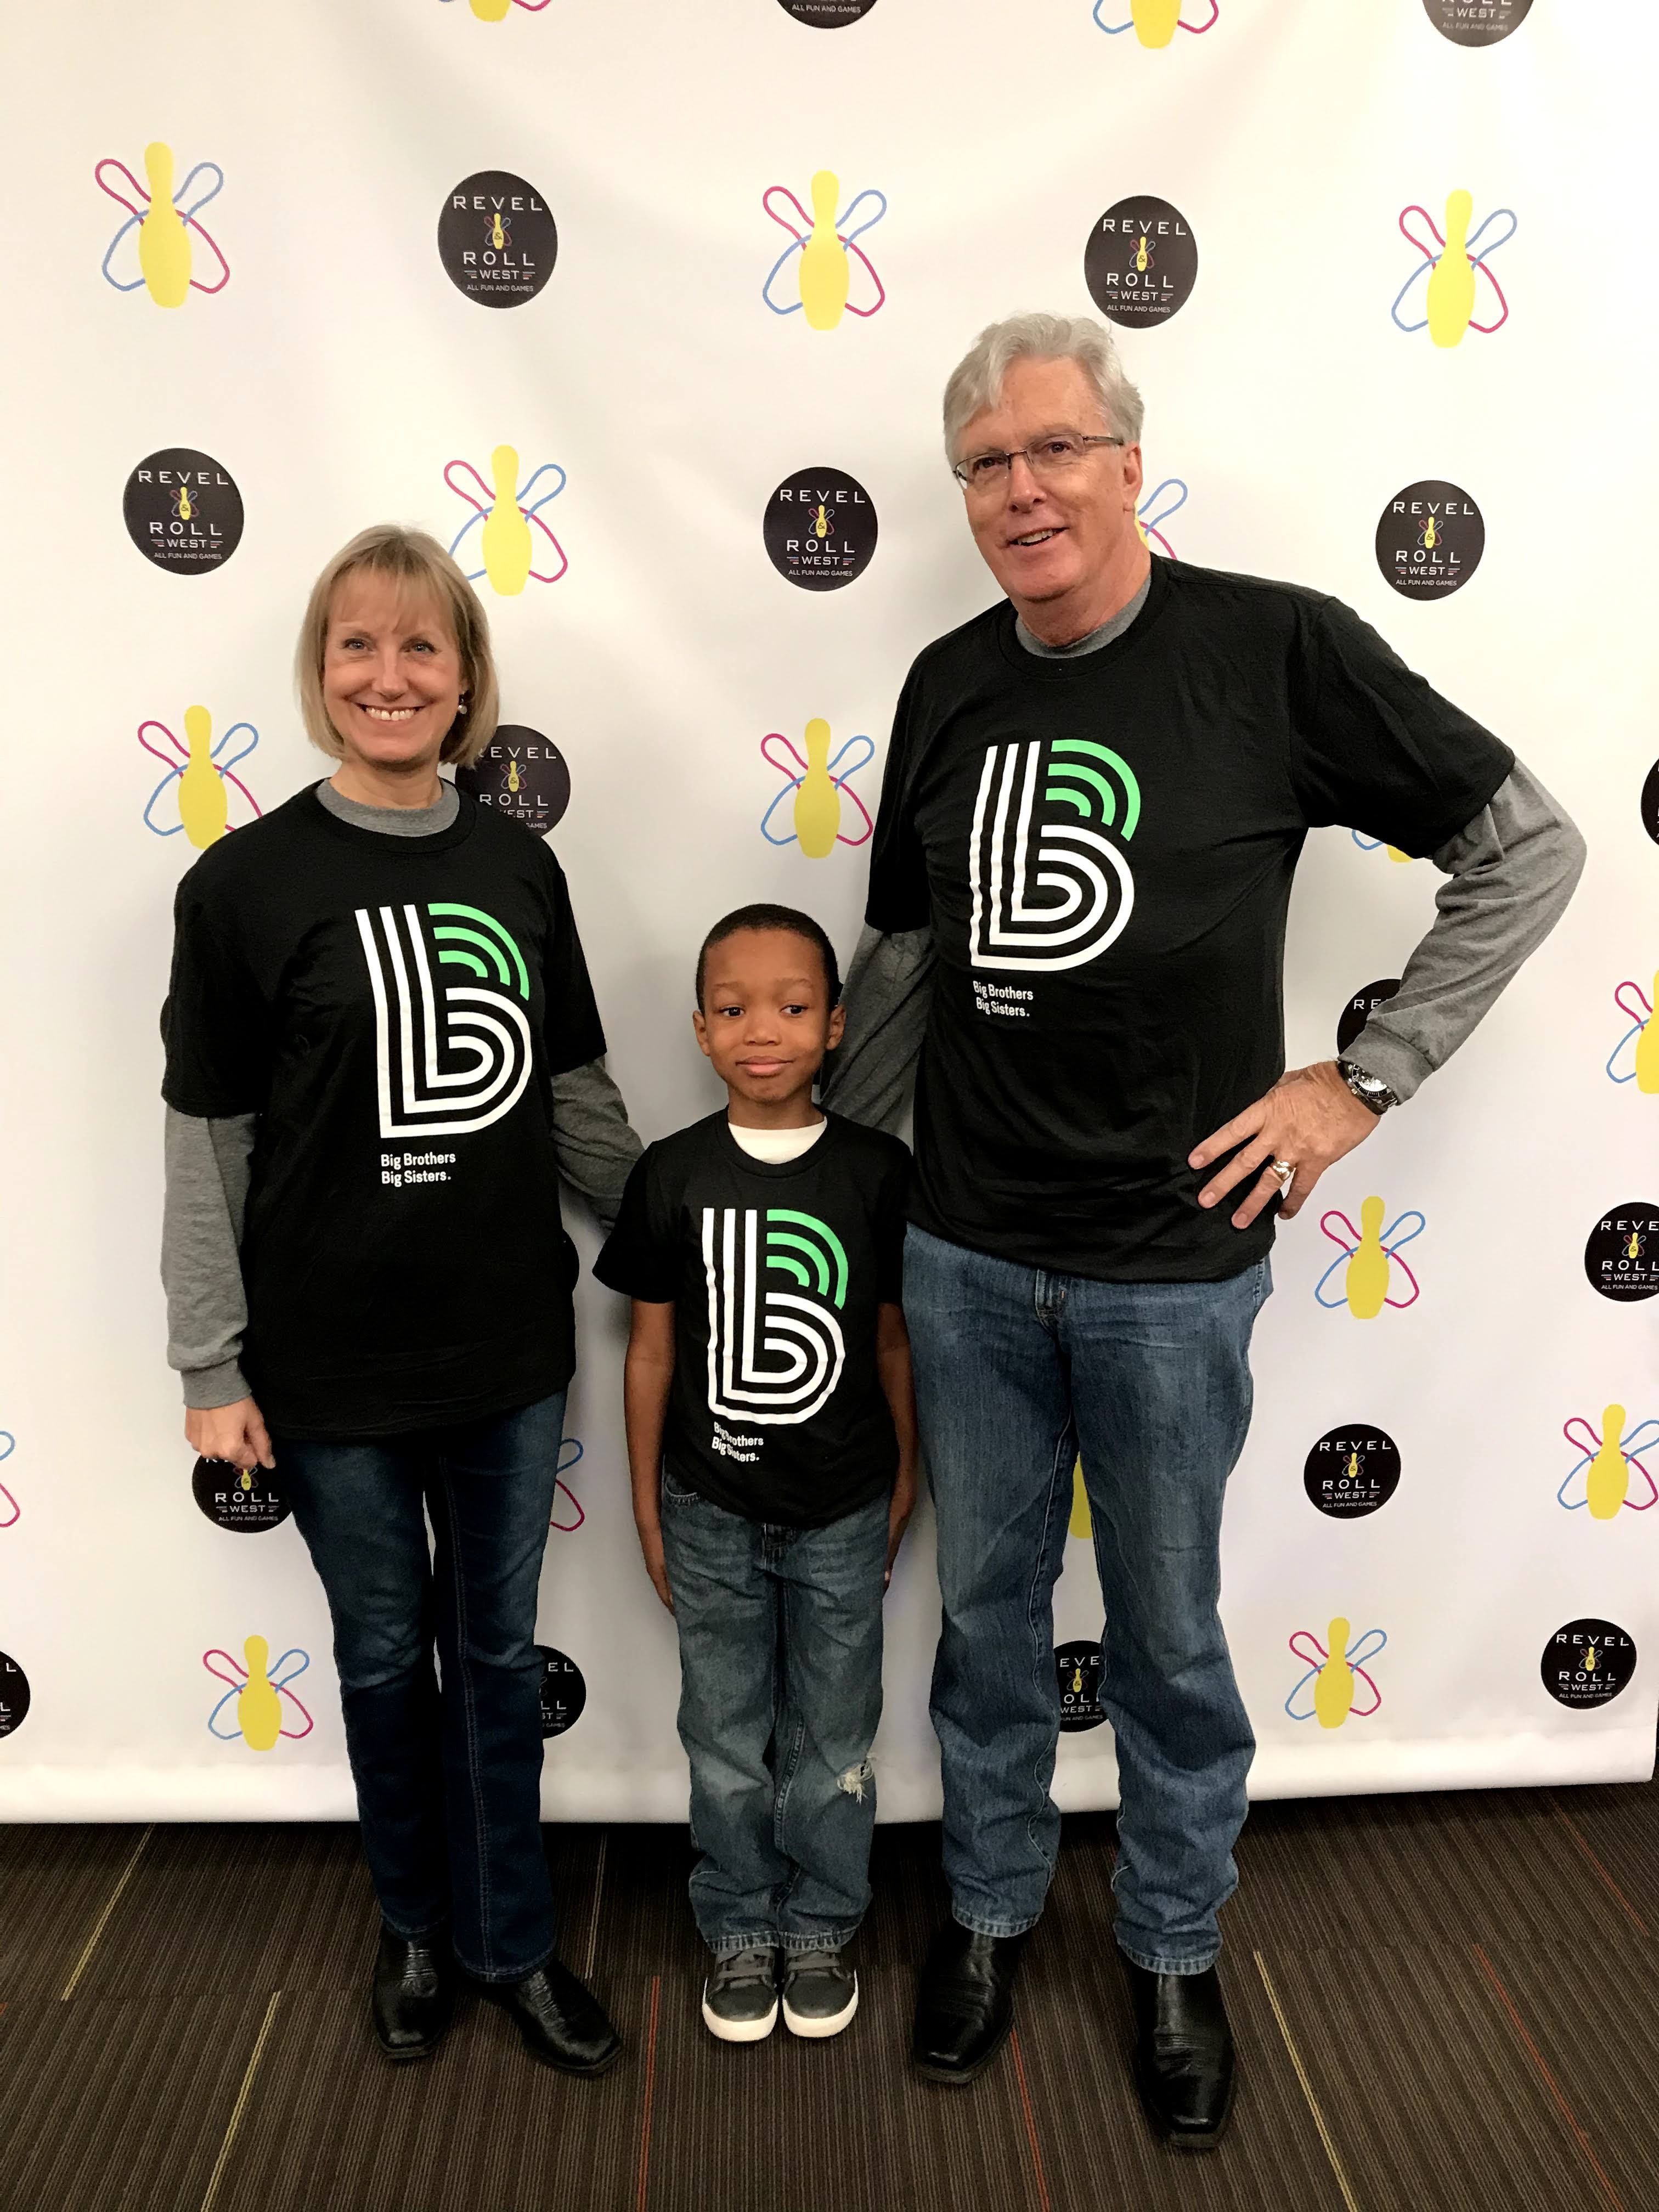 From left: Mary, Jeremiah, and Paul stand smiling at the camera wearing BBBS tshirts.